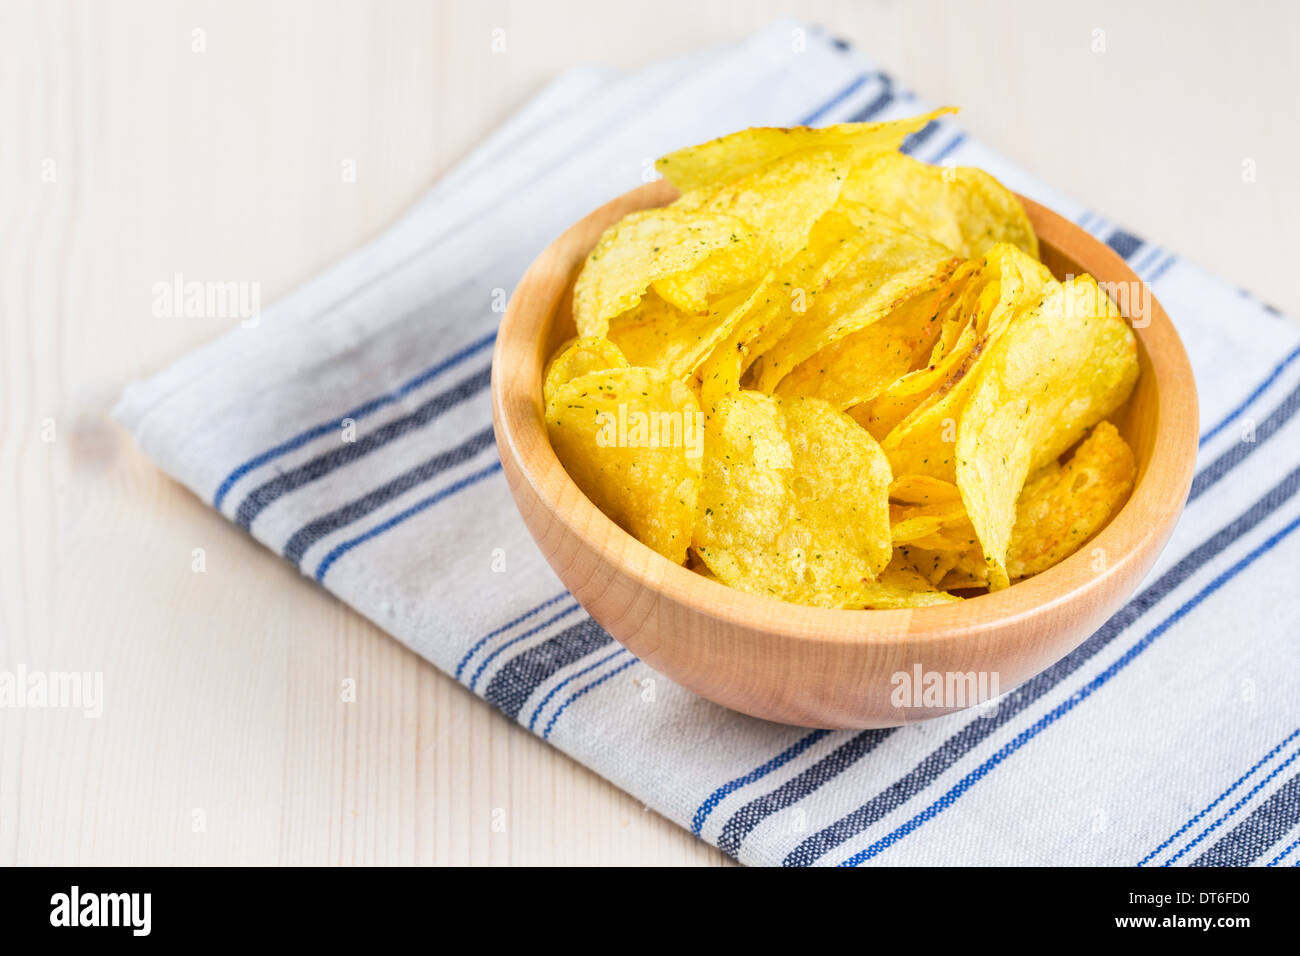 Potato chips in a white ceramic bowl on the table Stock Photo